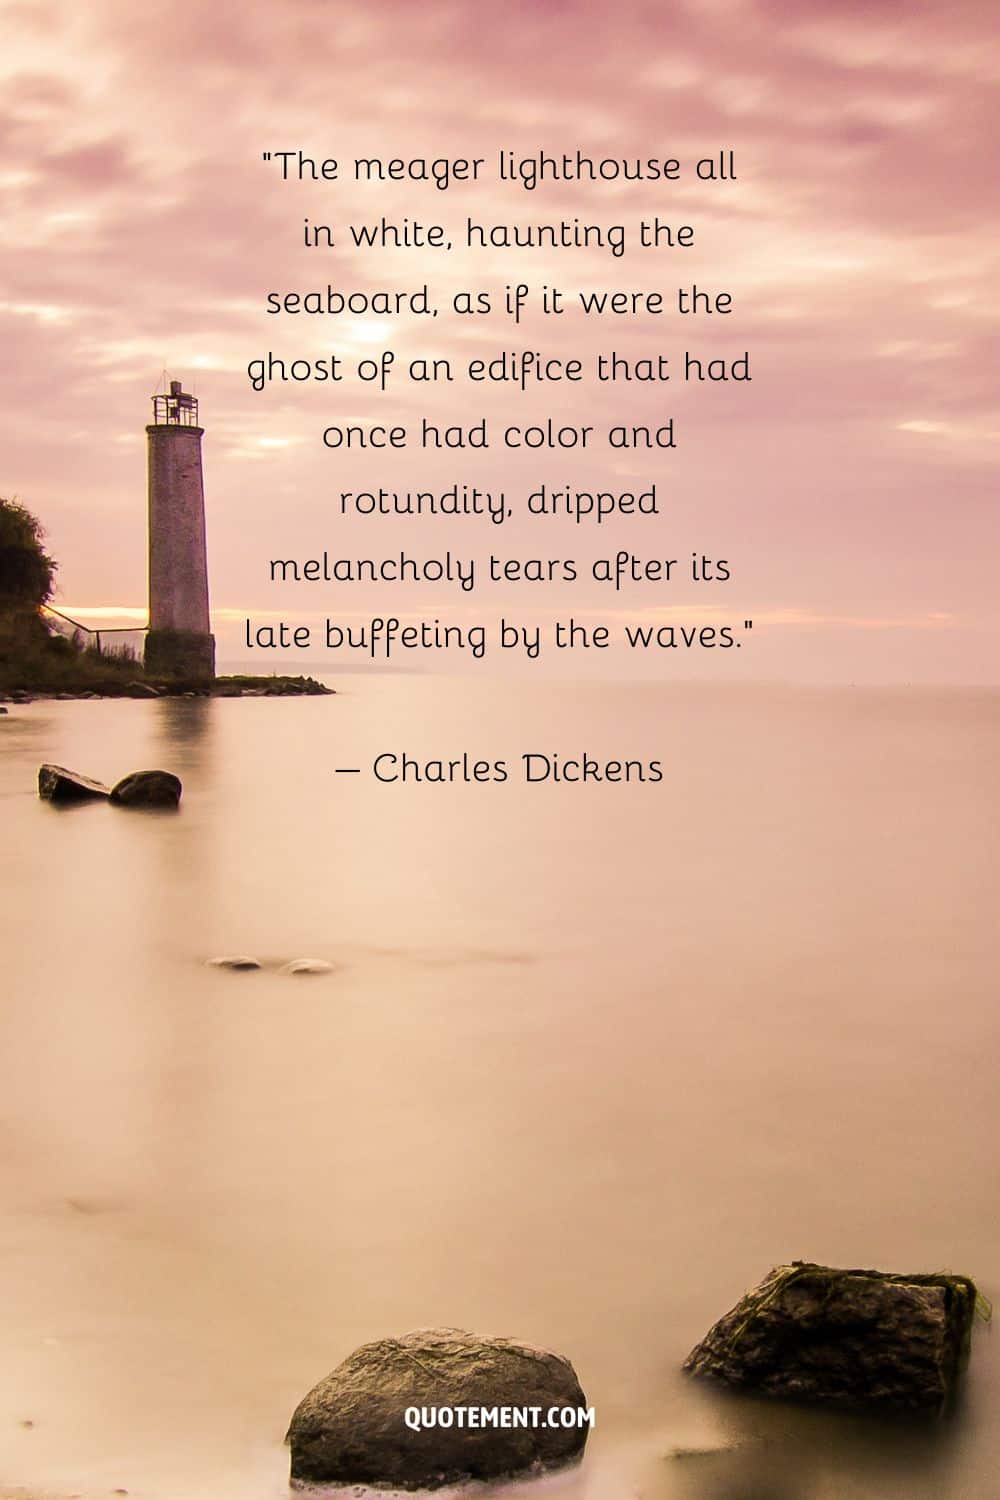 Mind-blowing quote by Charles Dickens and a lighthouse in the background